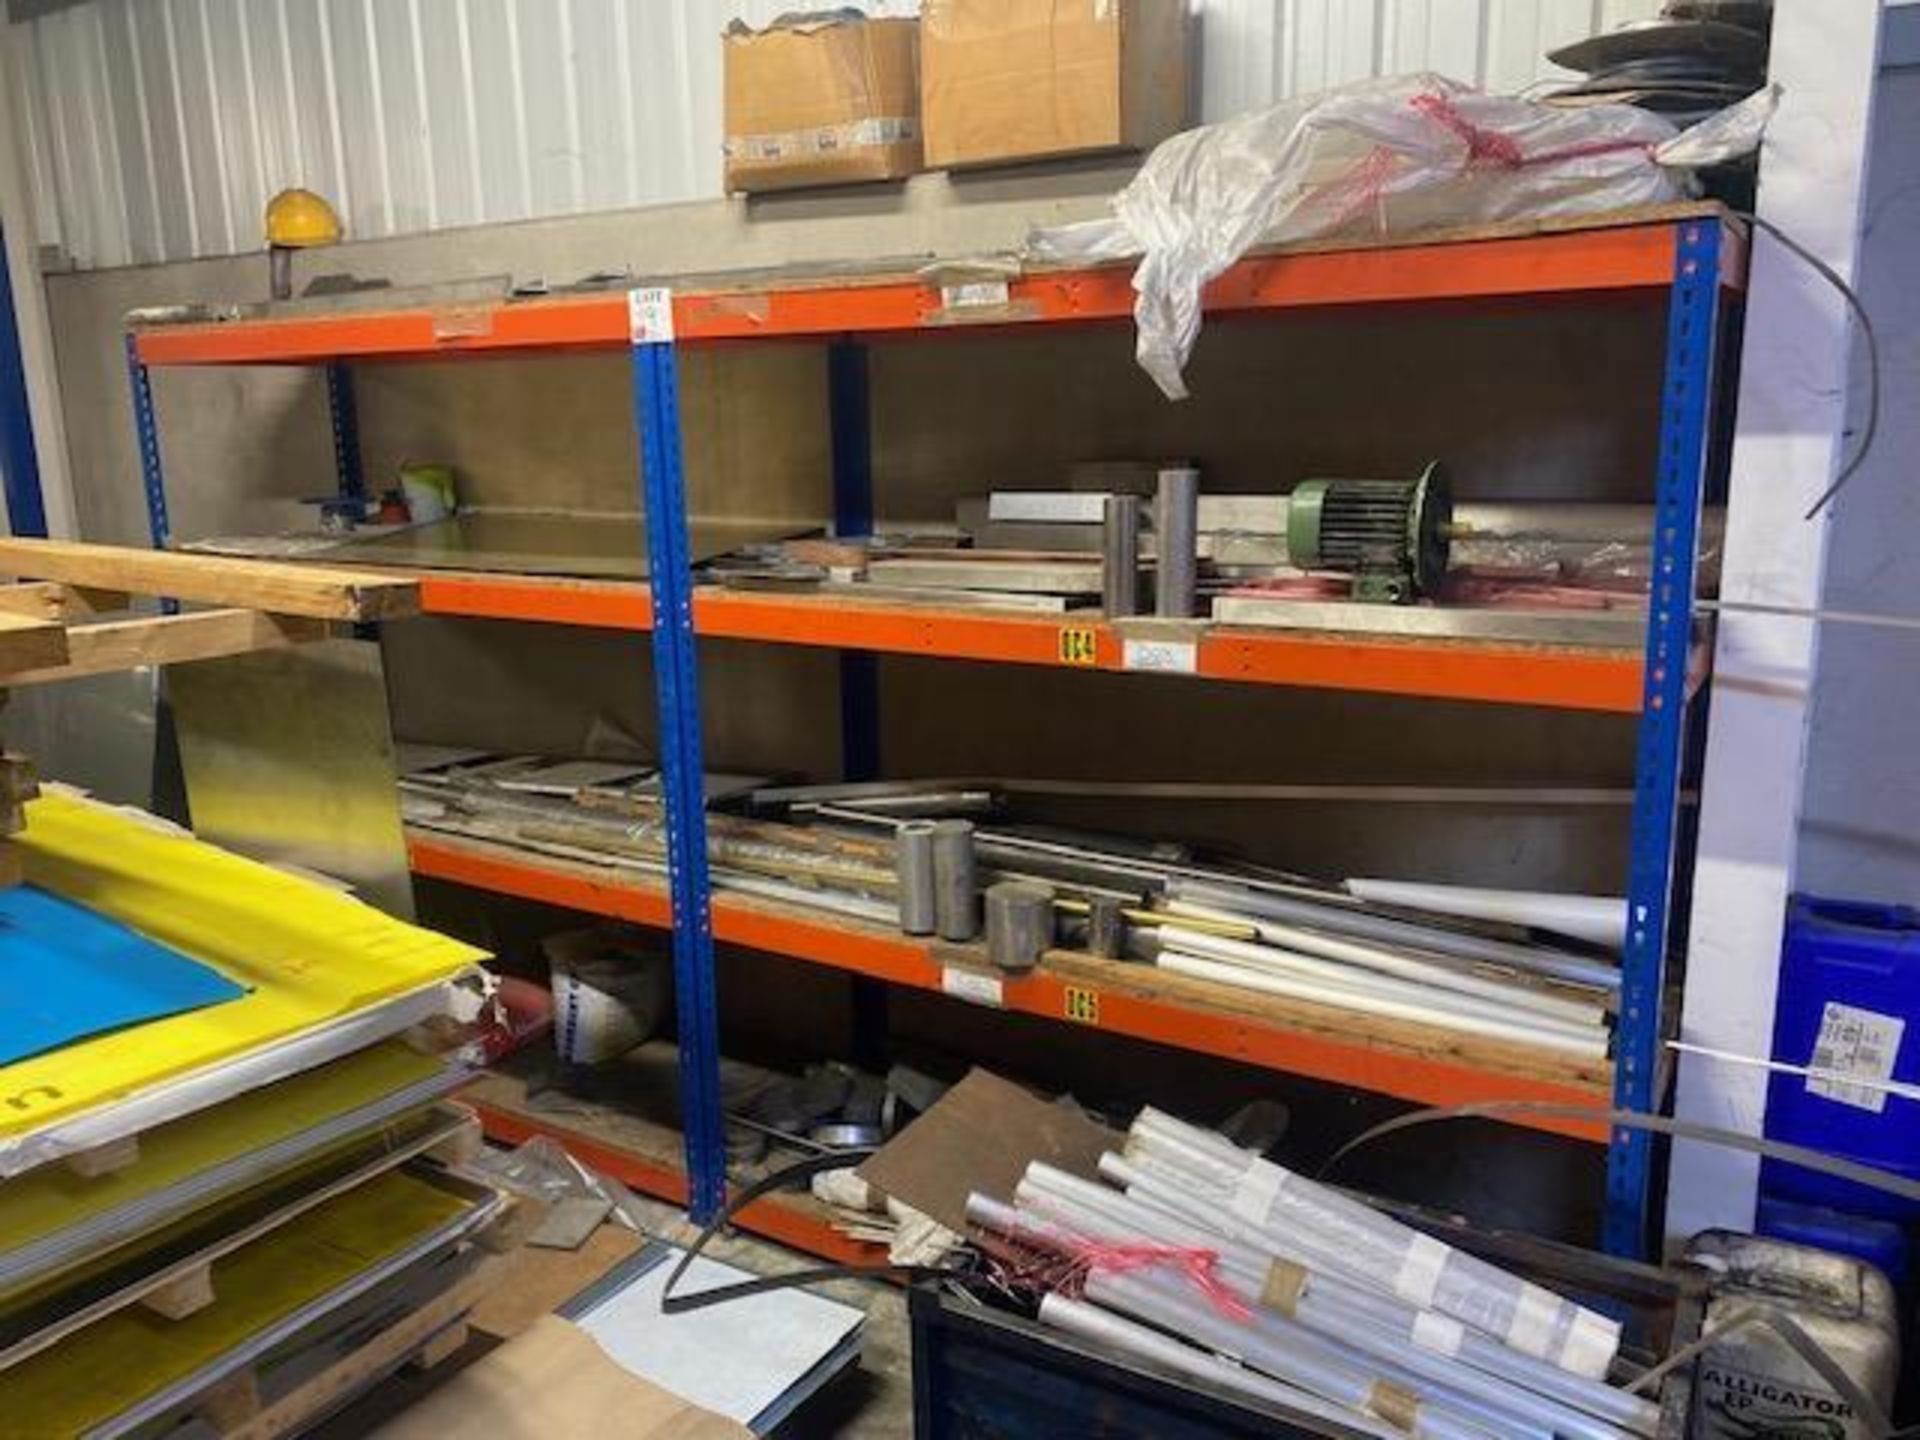 Two bays of light duty racking, length 1.8 meter, height 2 m, depth 600 mm (please note contents not